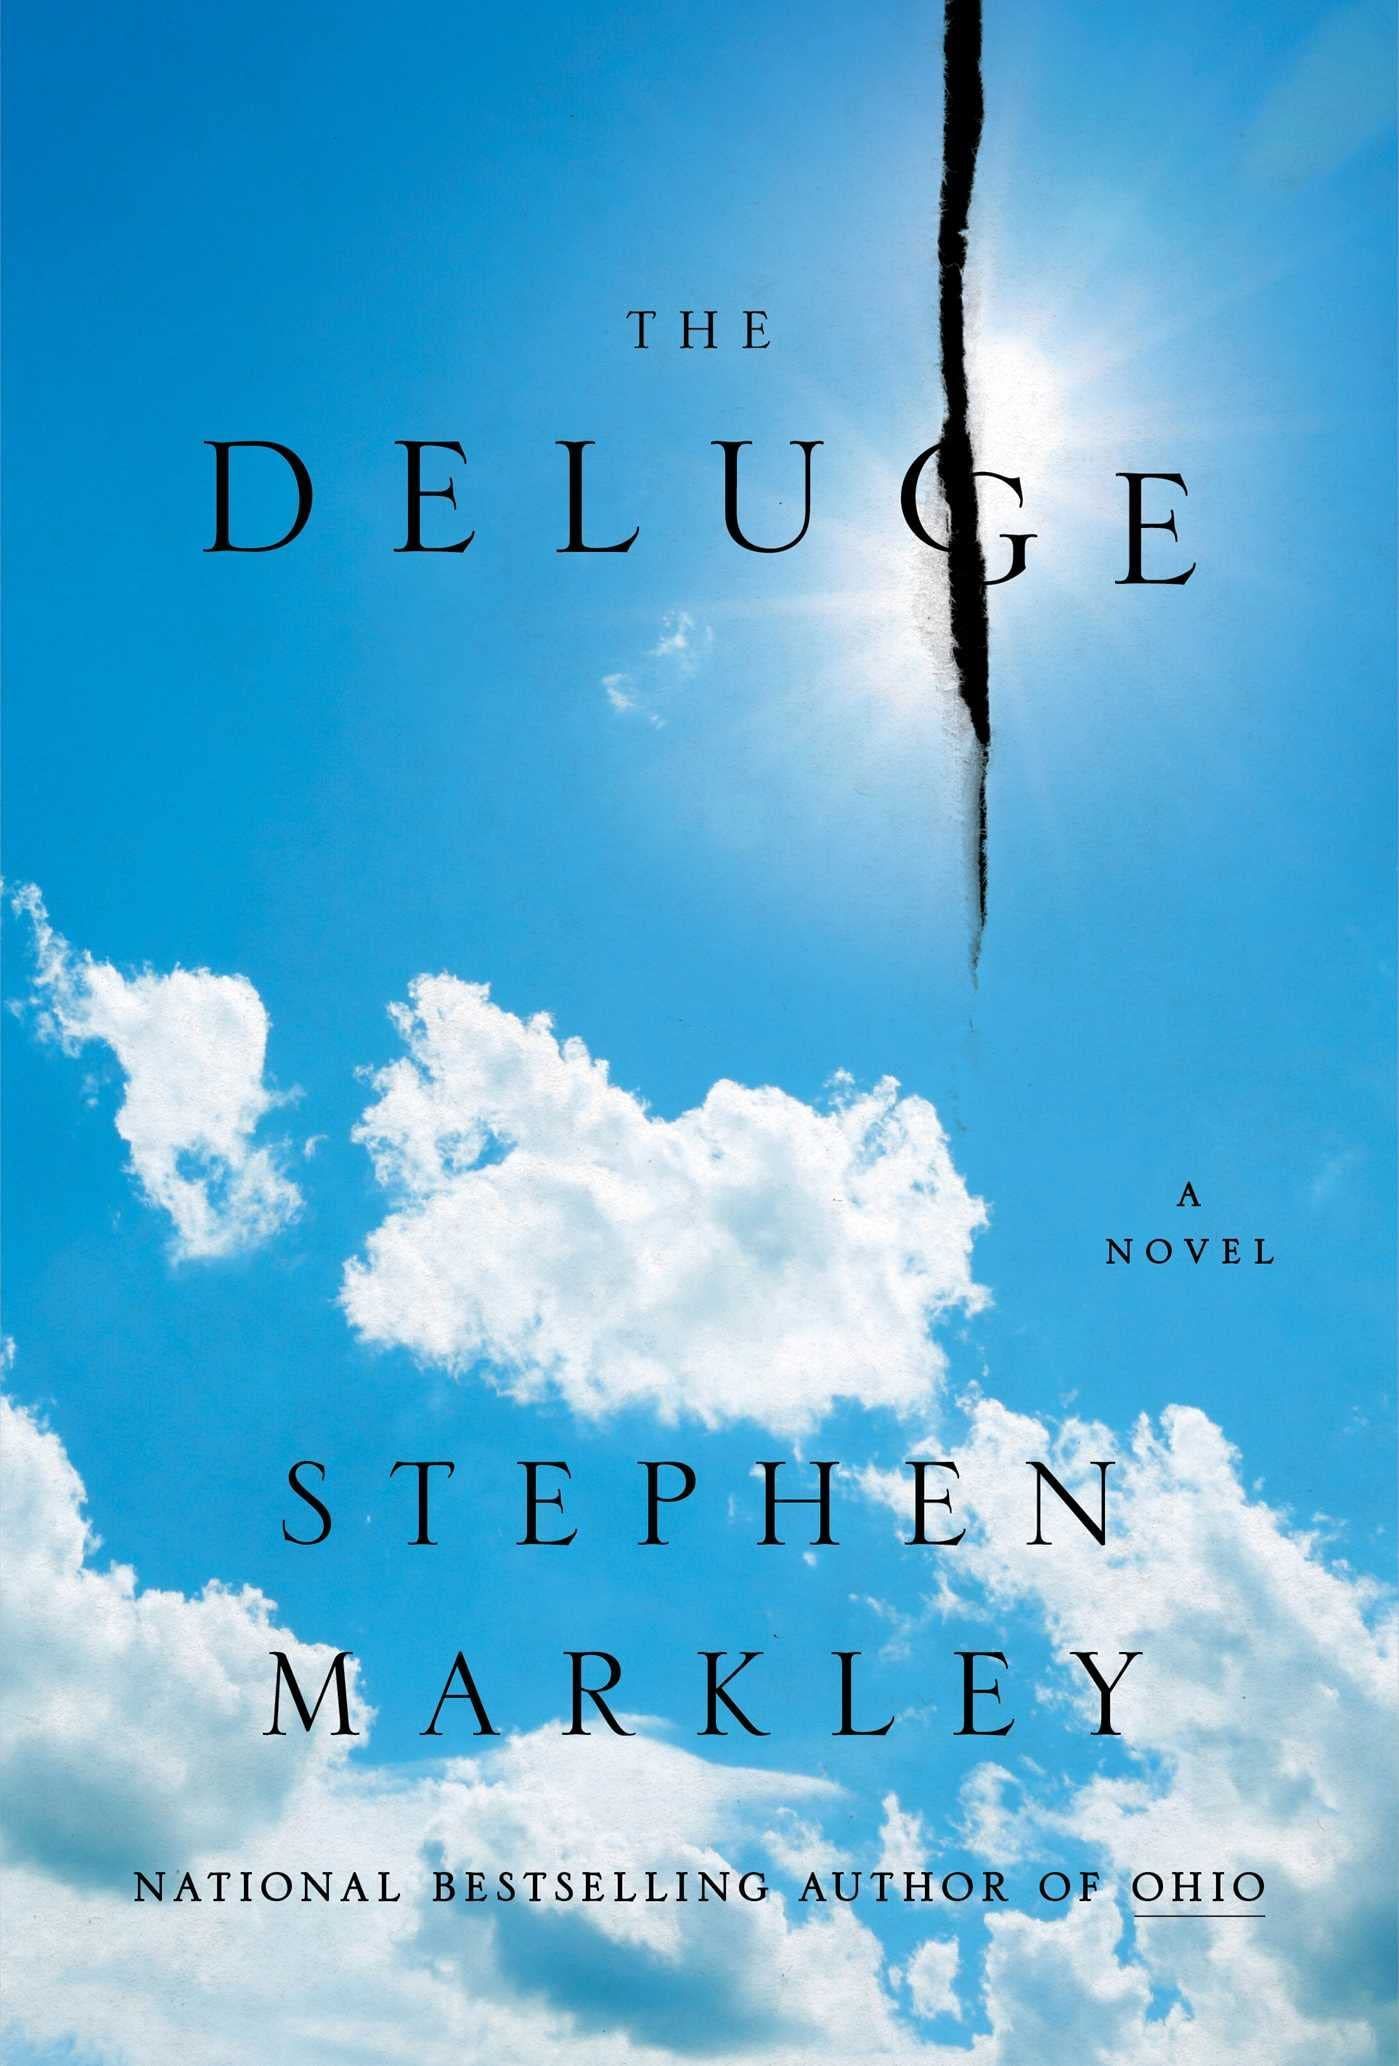 The Enormity of It All: On Stephen Markley’s “The Deluge”